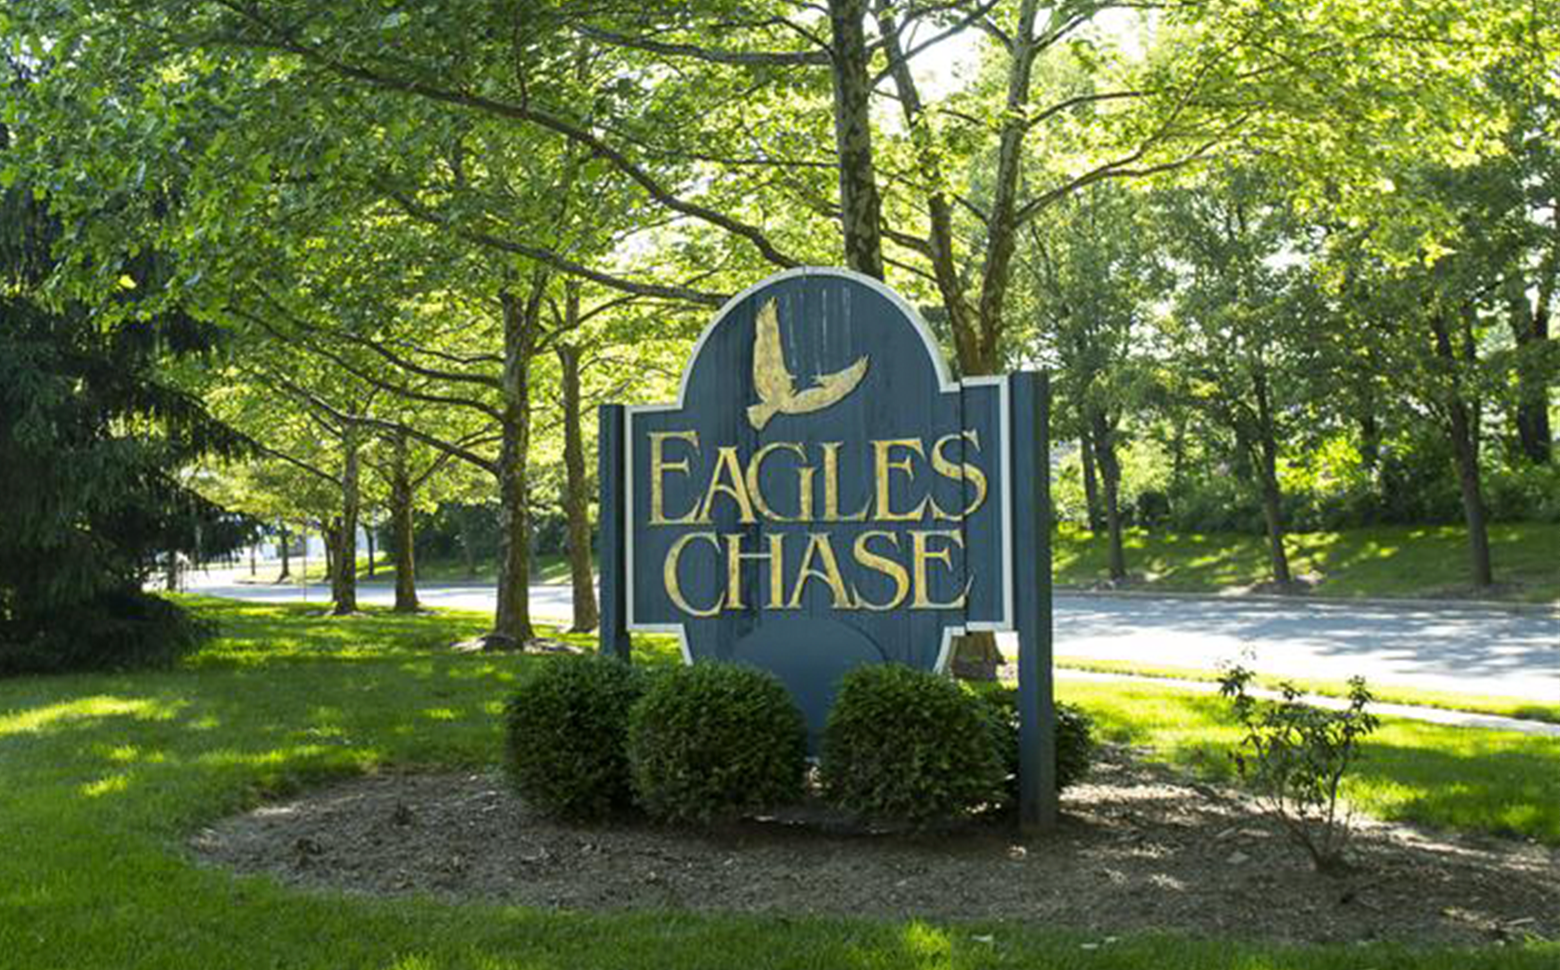 Eagles Chase, Lawrence Township